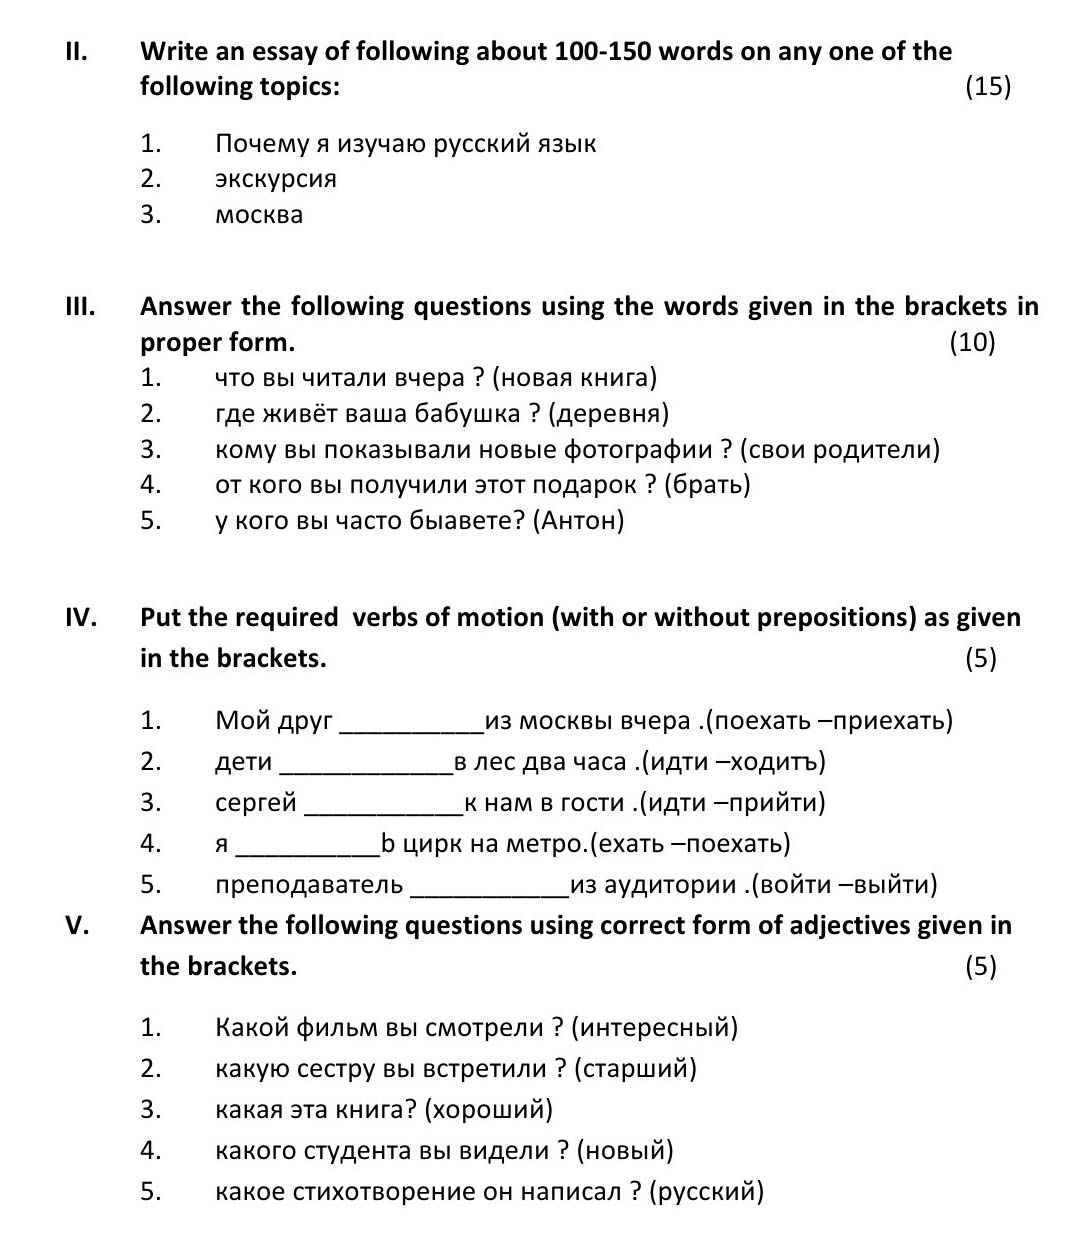 Russian CBSE Class X Sample Question Paper 2018-19 - Image 2